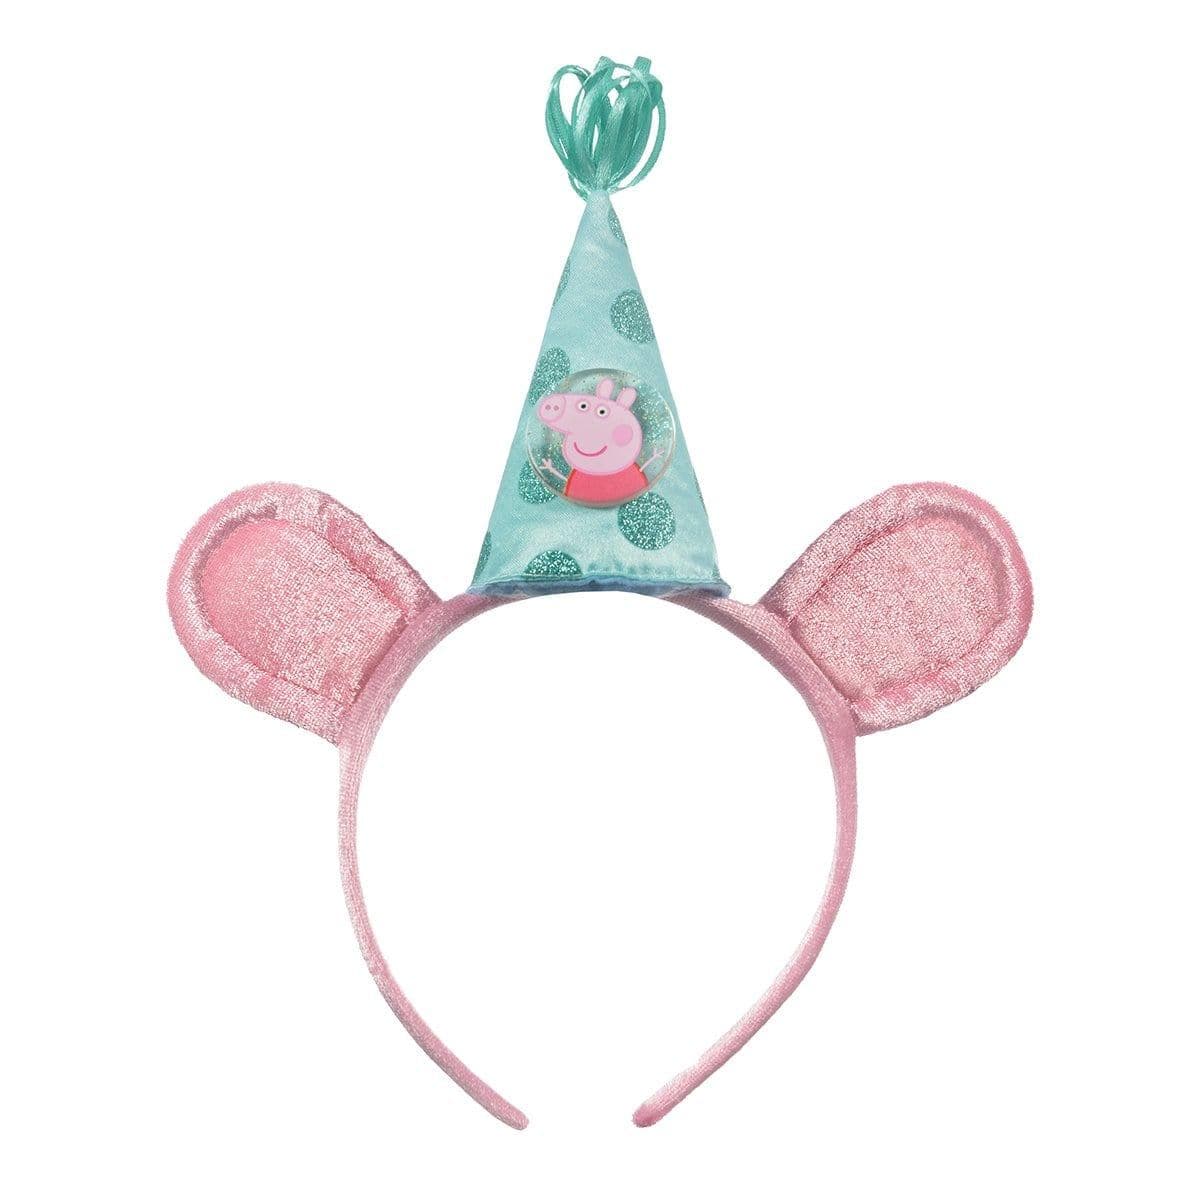 Buy Kids Birthday Peppa Pig Confetti Deluxe Headband sold at Party Expert